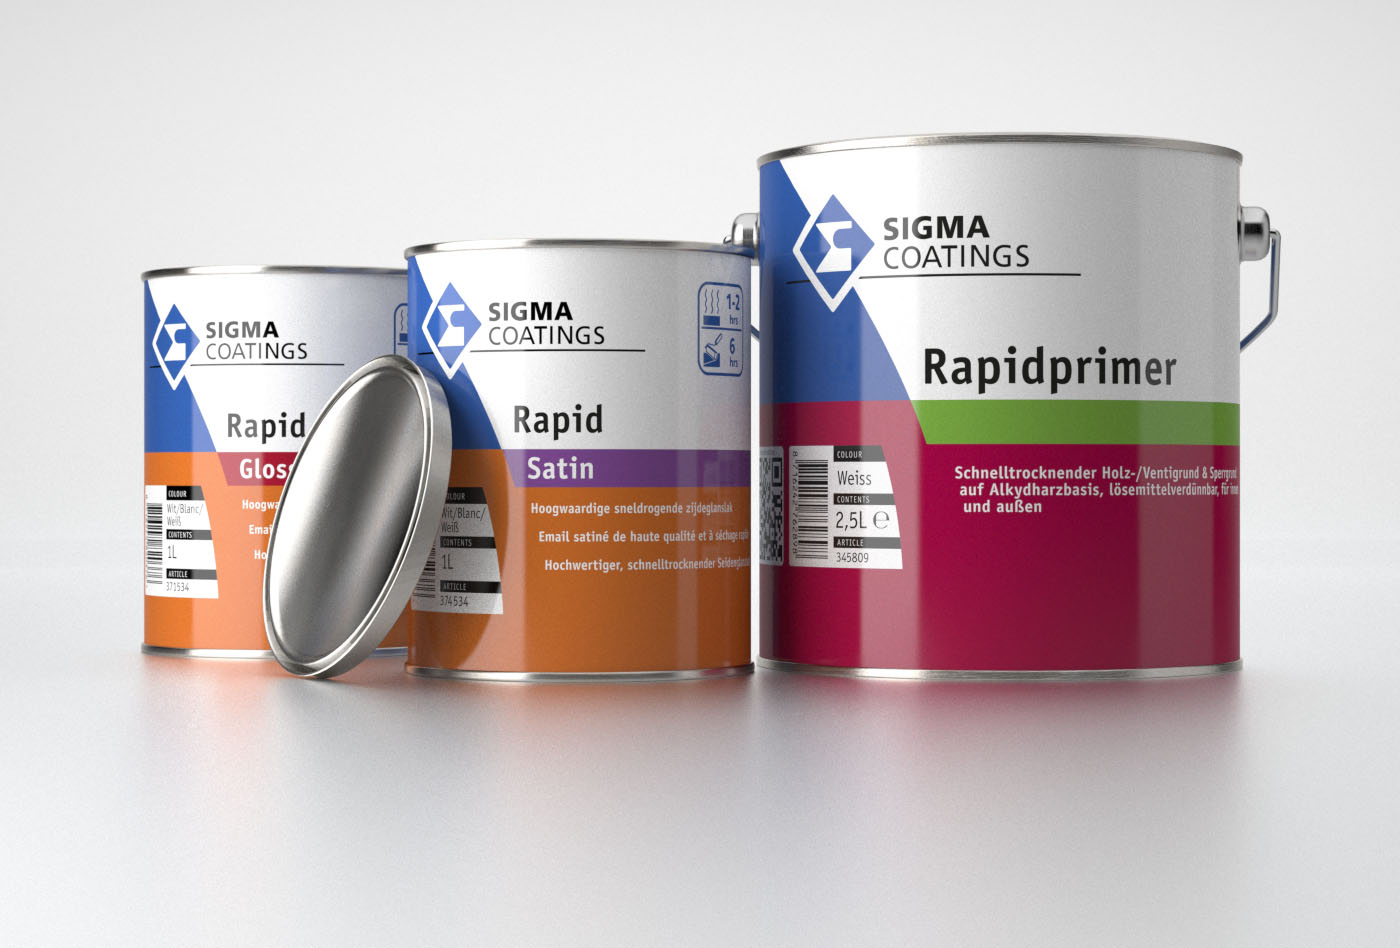 Sigma packaging of paint cans